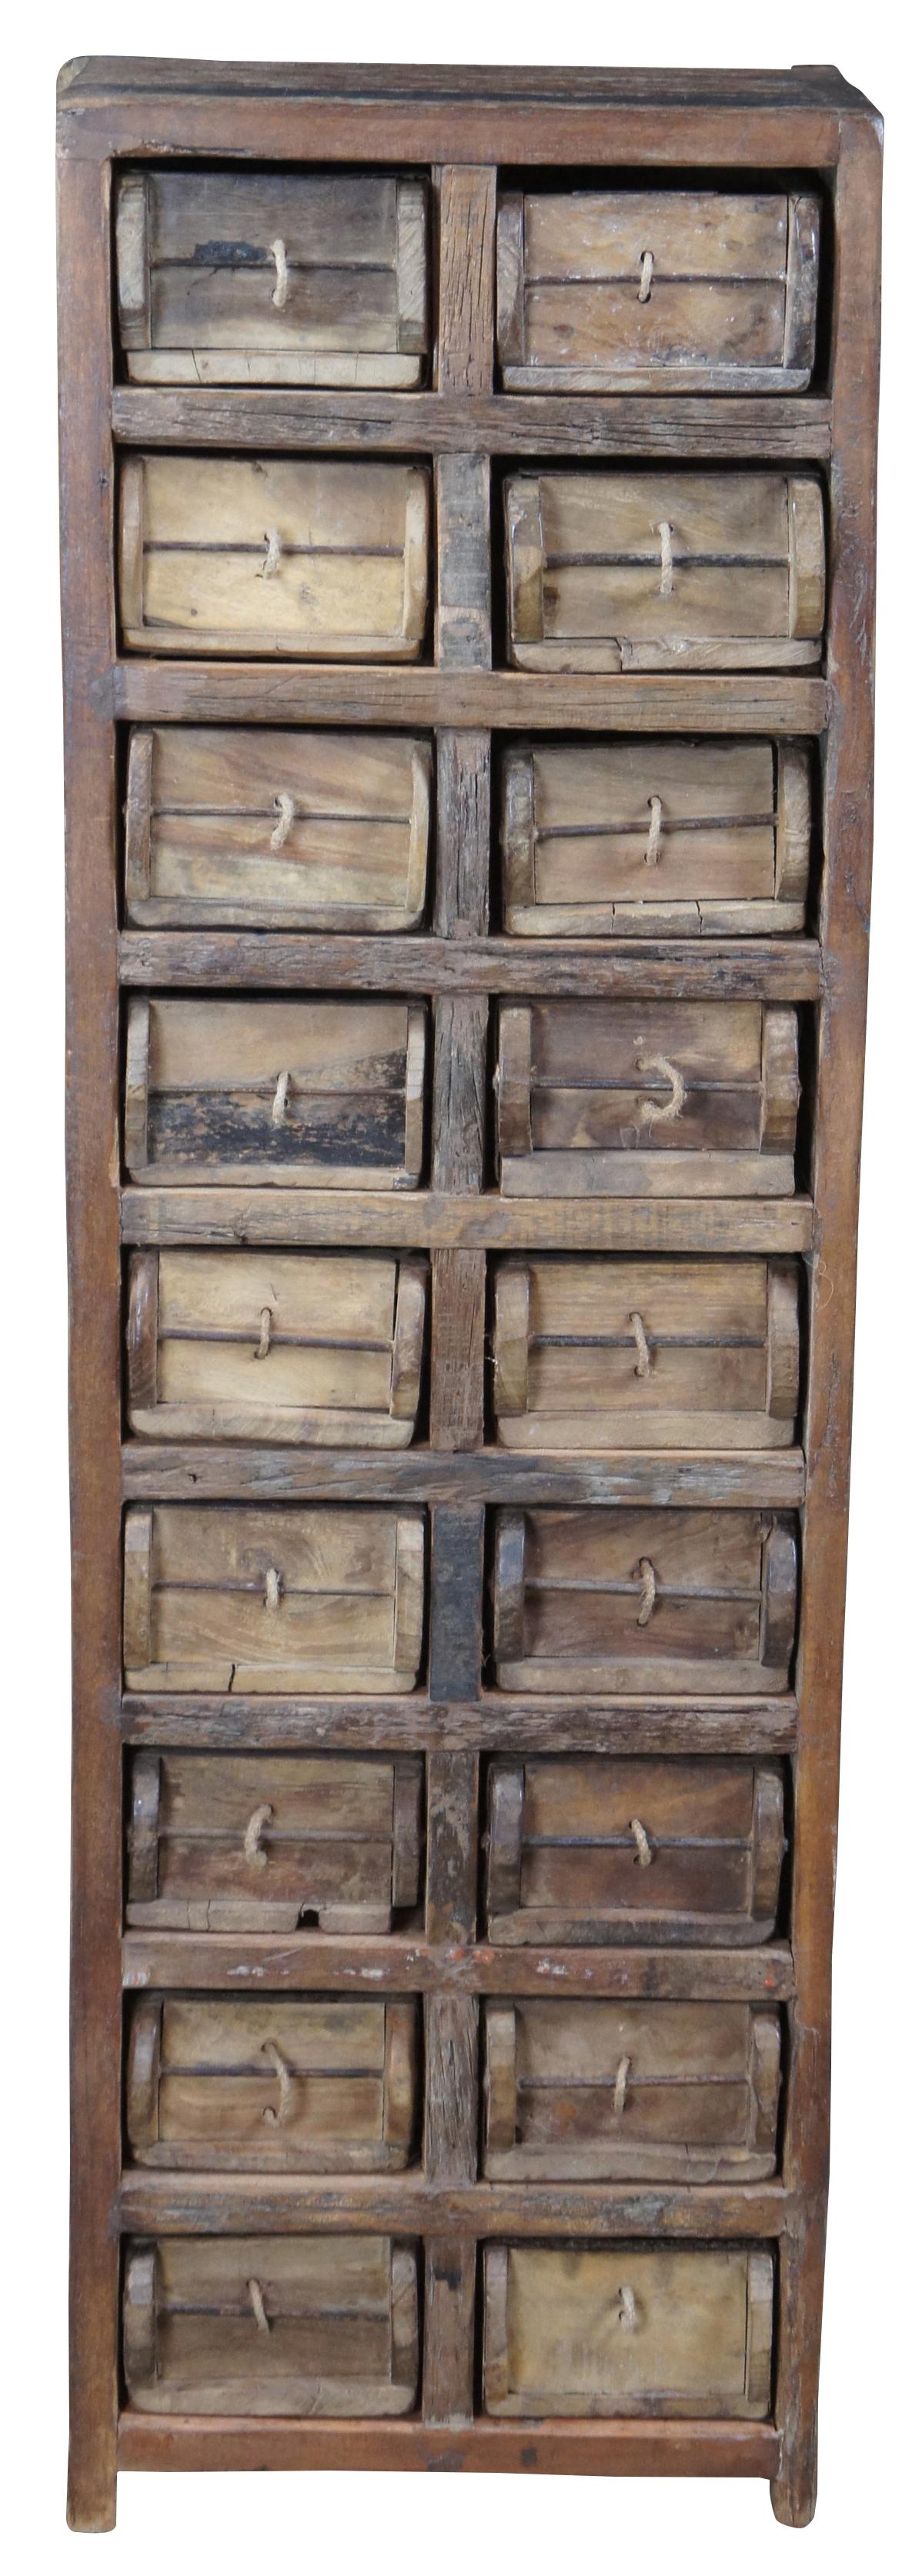 20th century rustic 18 drawer apothecary cabinet. Made from heavy wood with iron accented drawers featuring a unique rope pull design.